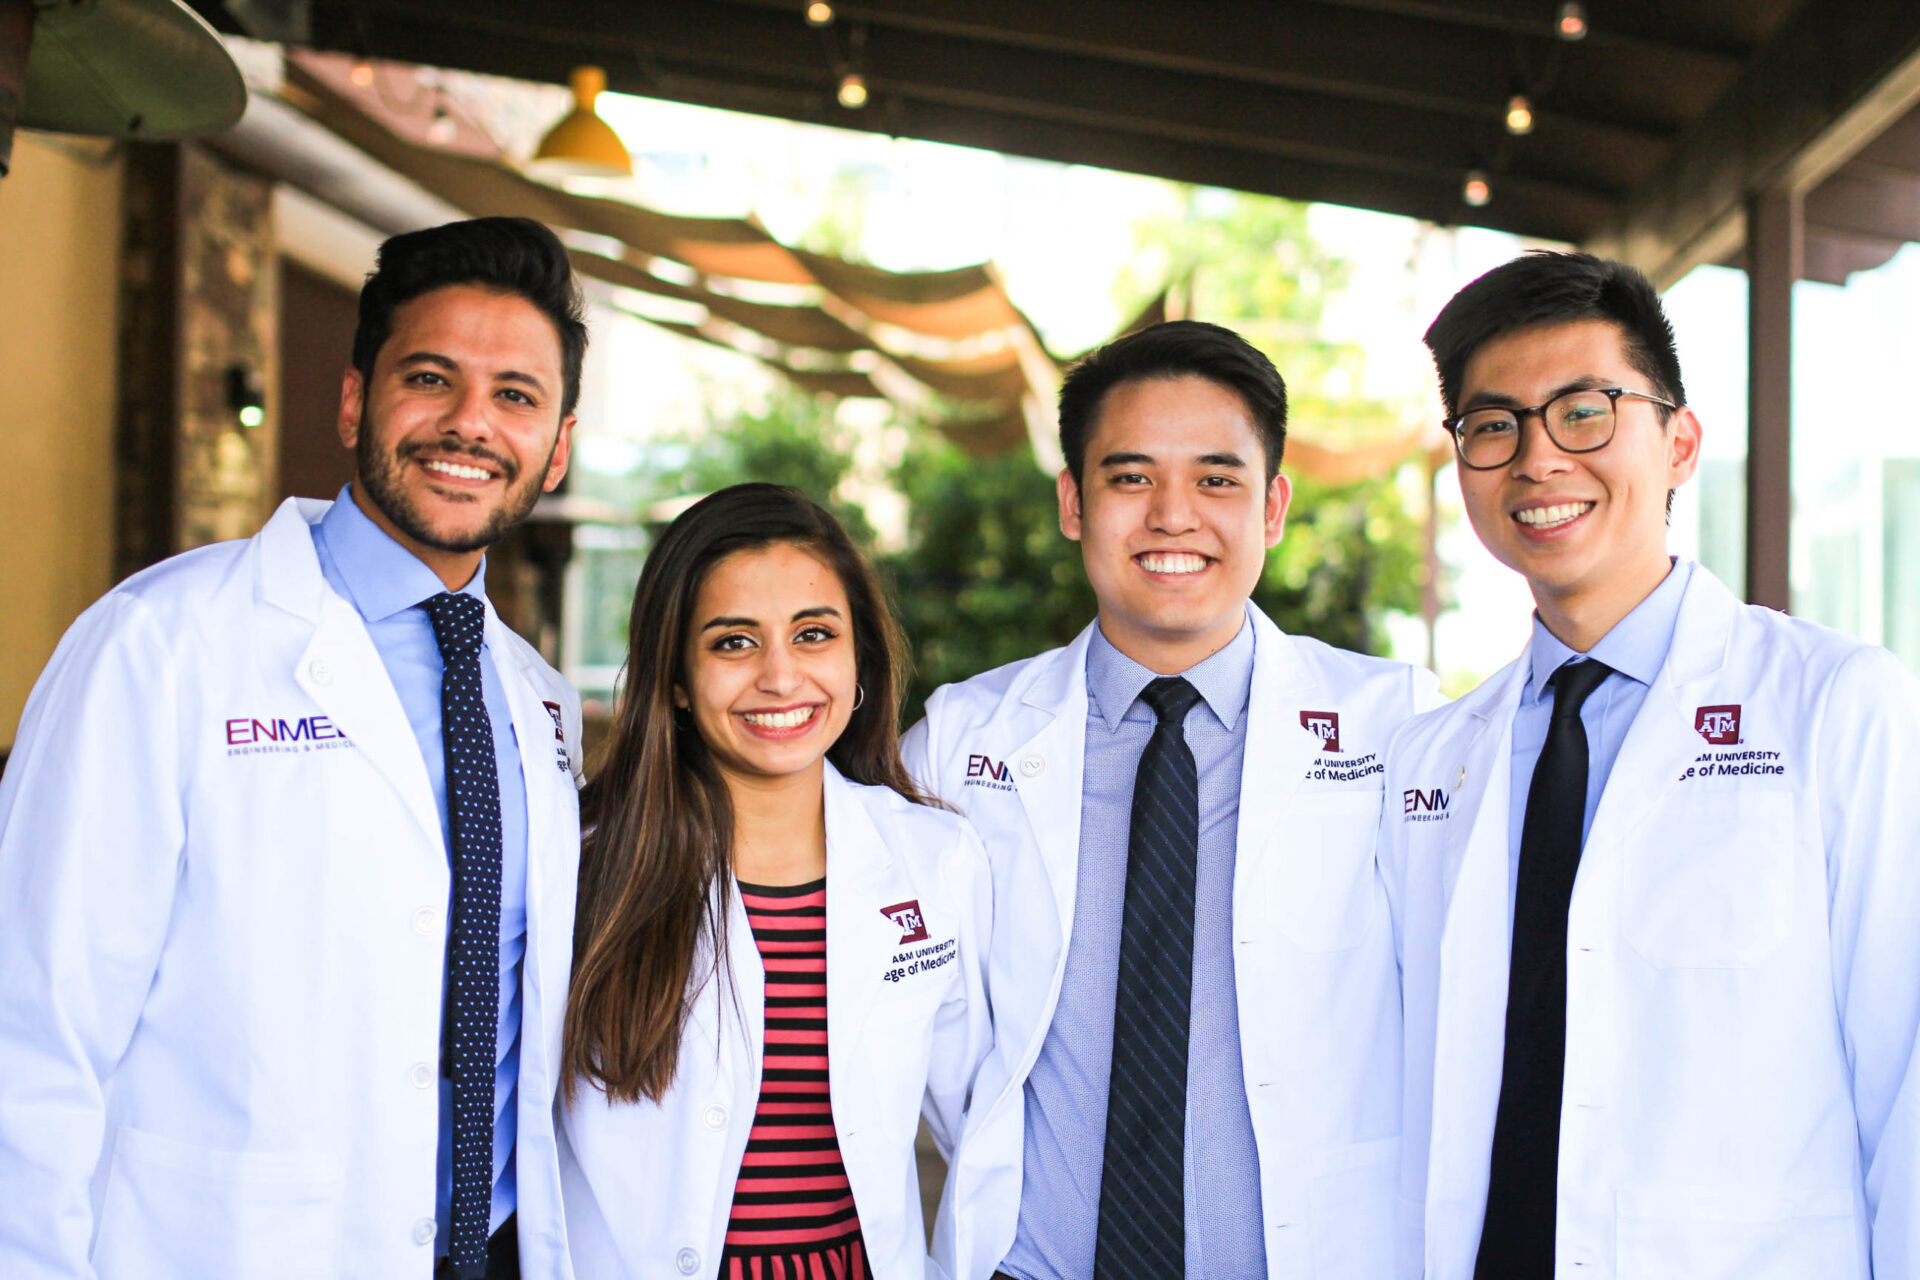 Prior to Zhi's own decision to apply to the program, she took this photo of students from EnMed’s inaugural class while she was a guest at the Texas A&M College of Medicine’s 2019 white coat ceremony.